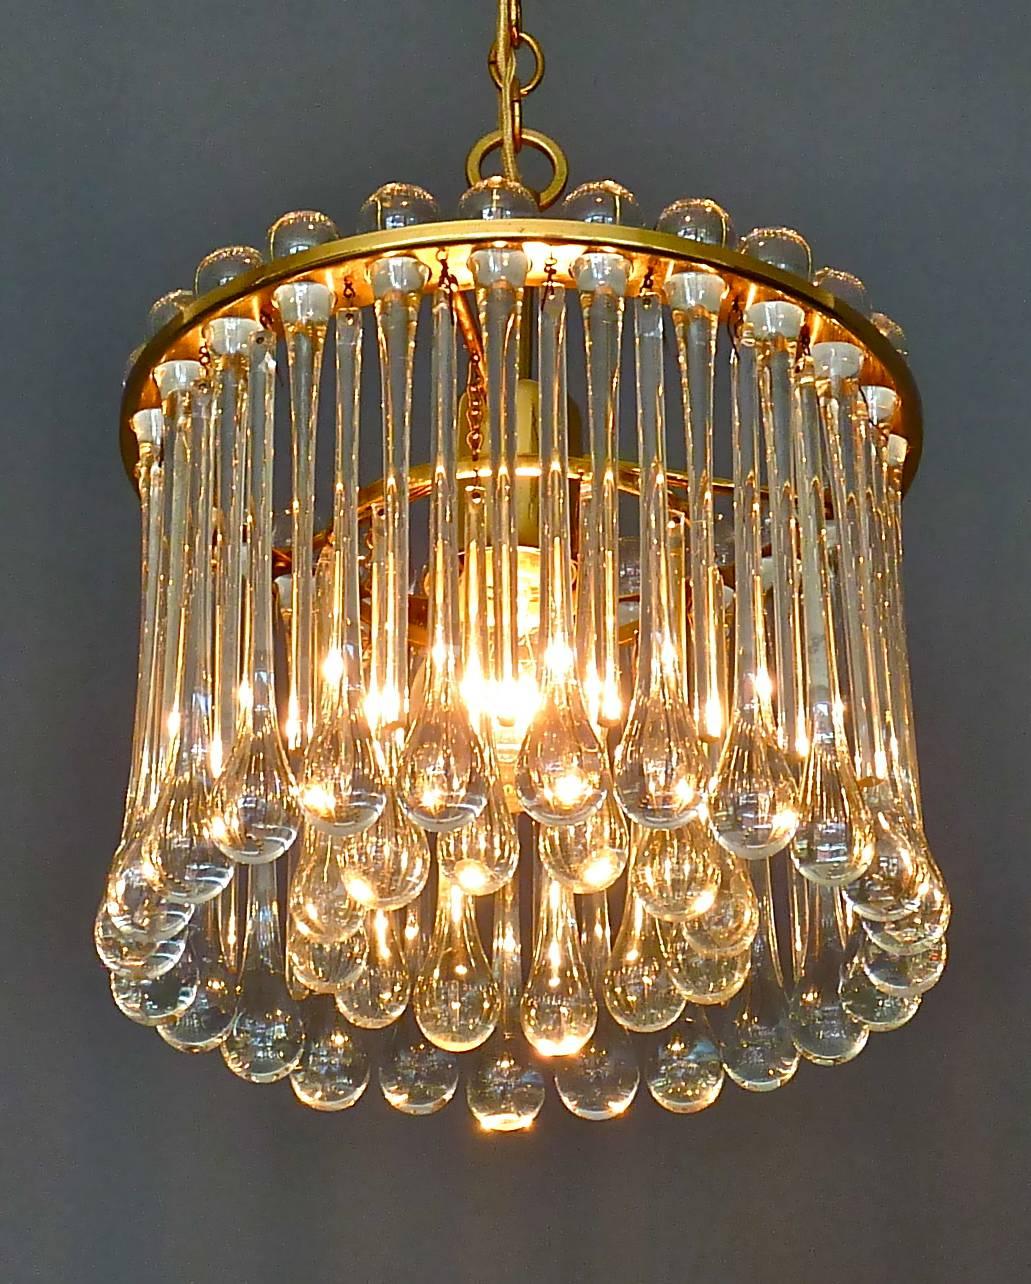 Gilt brass metal and crystal glass chandelier made by Palwa, Germany, circa 1960-1970. The chain-hanging length-adjustable chandelier has a gilt brass metal construction with lots of elongated Murano glass drops forming two glass rings. It bears the